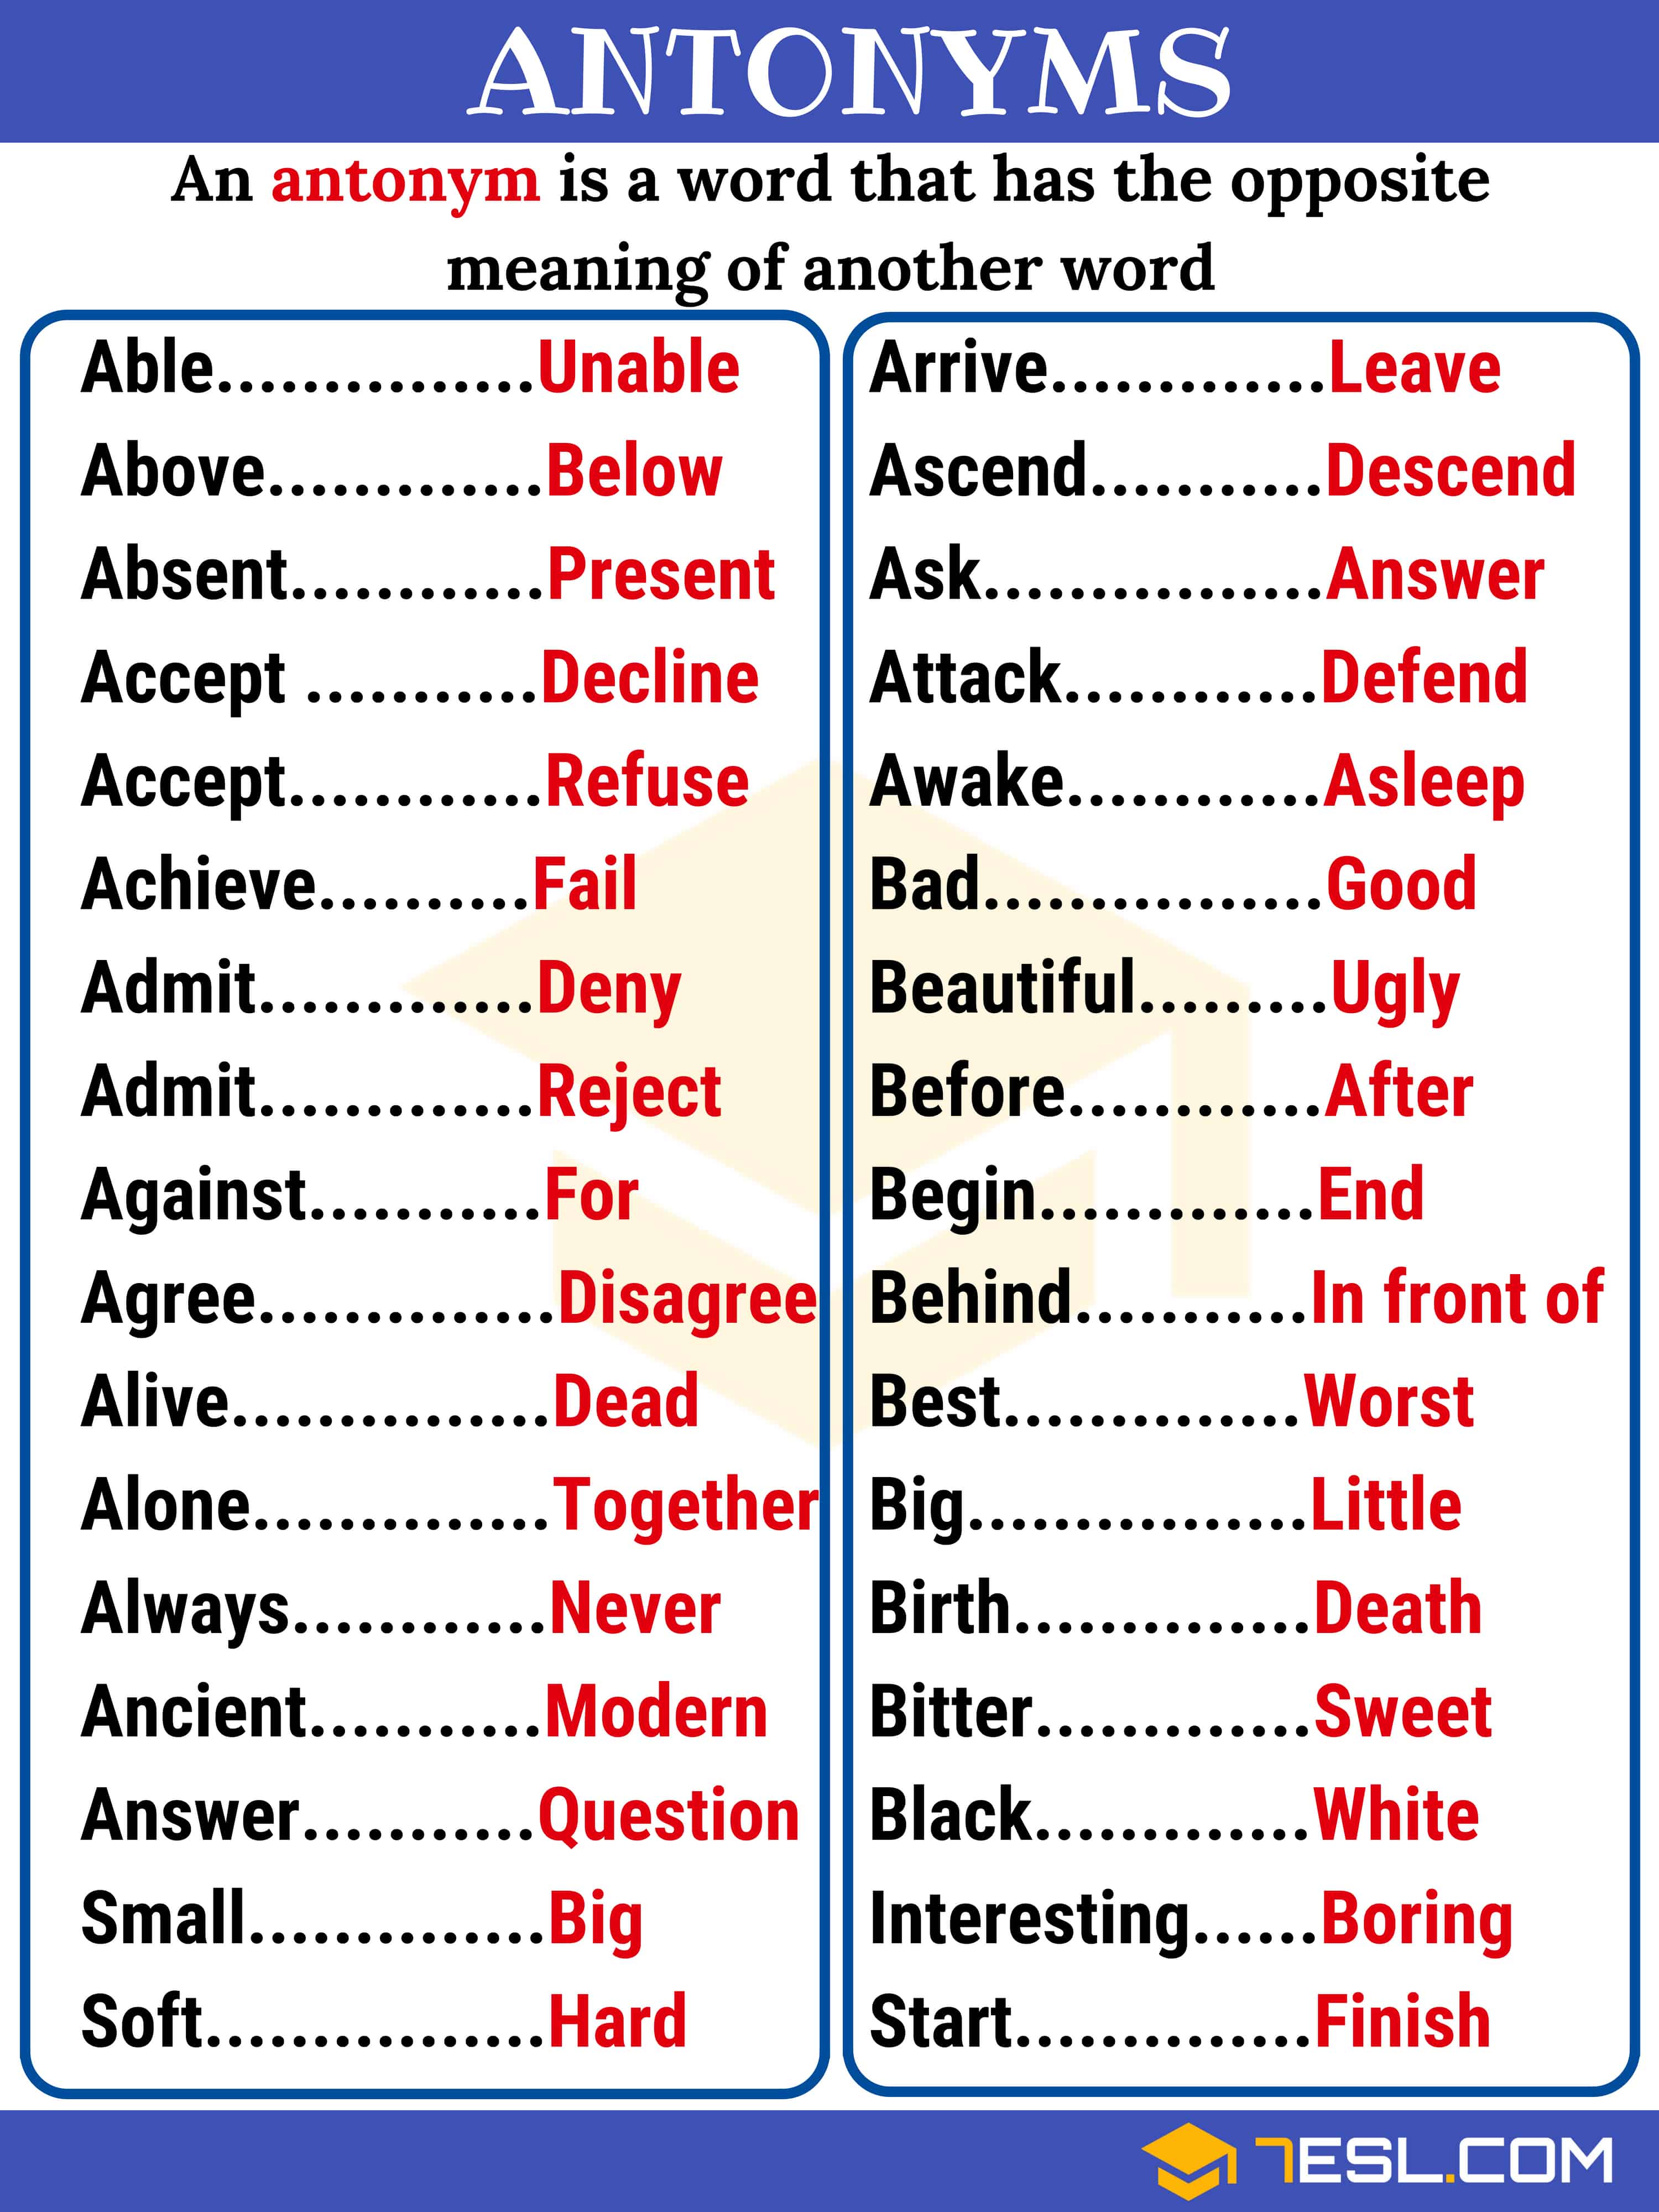 antonyms for able